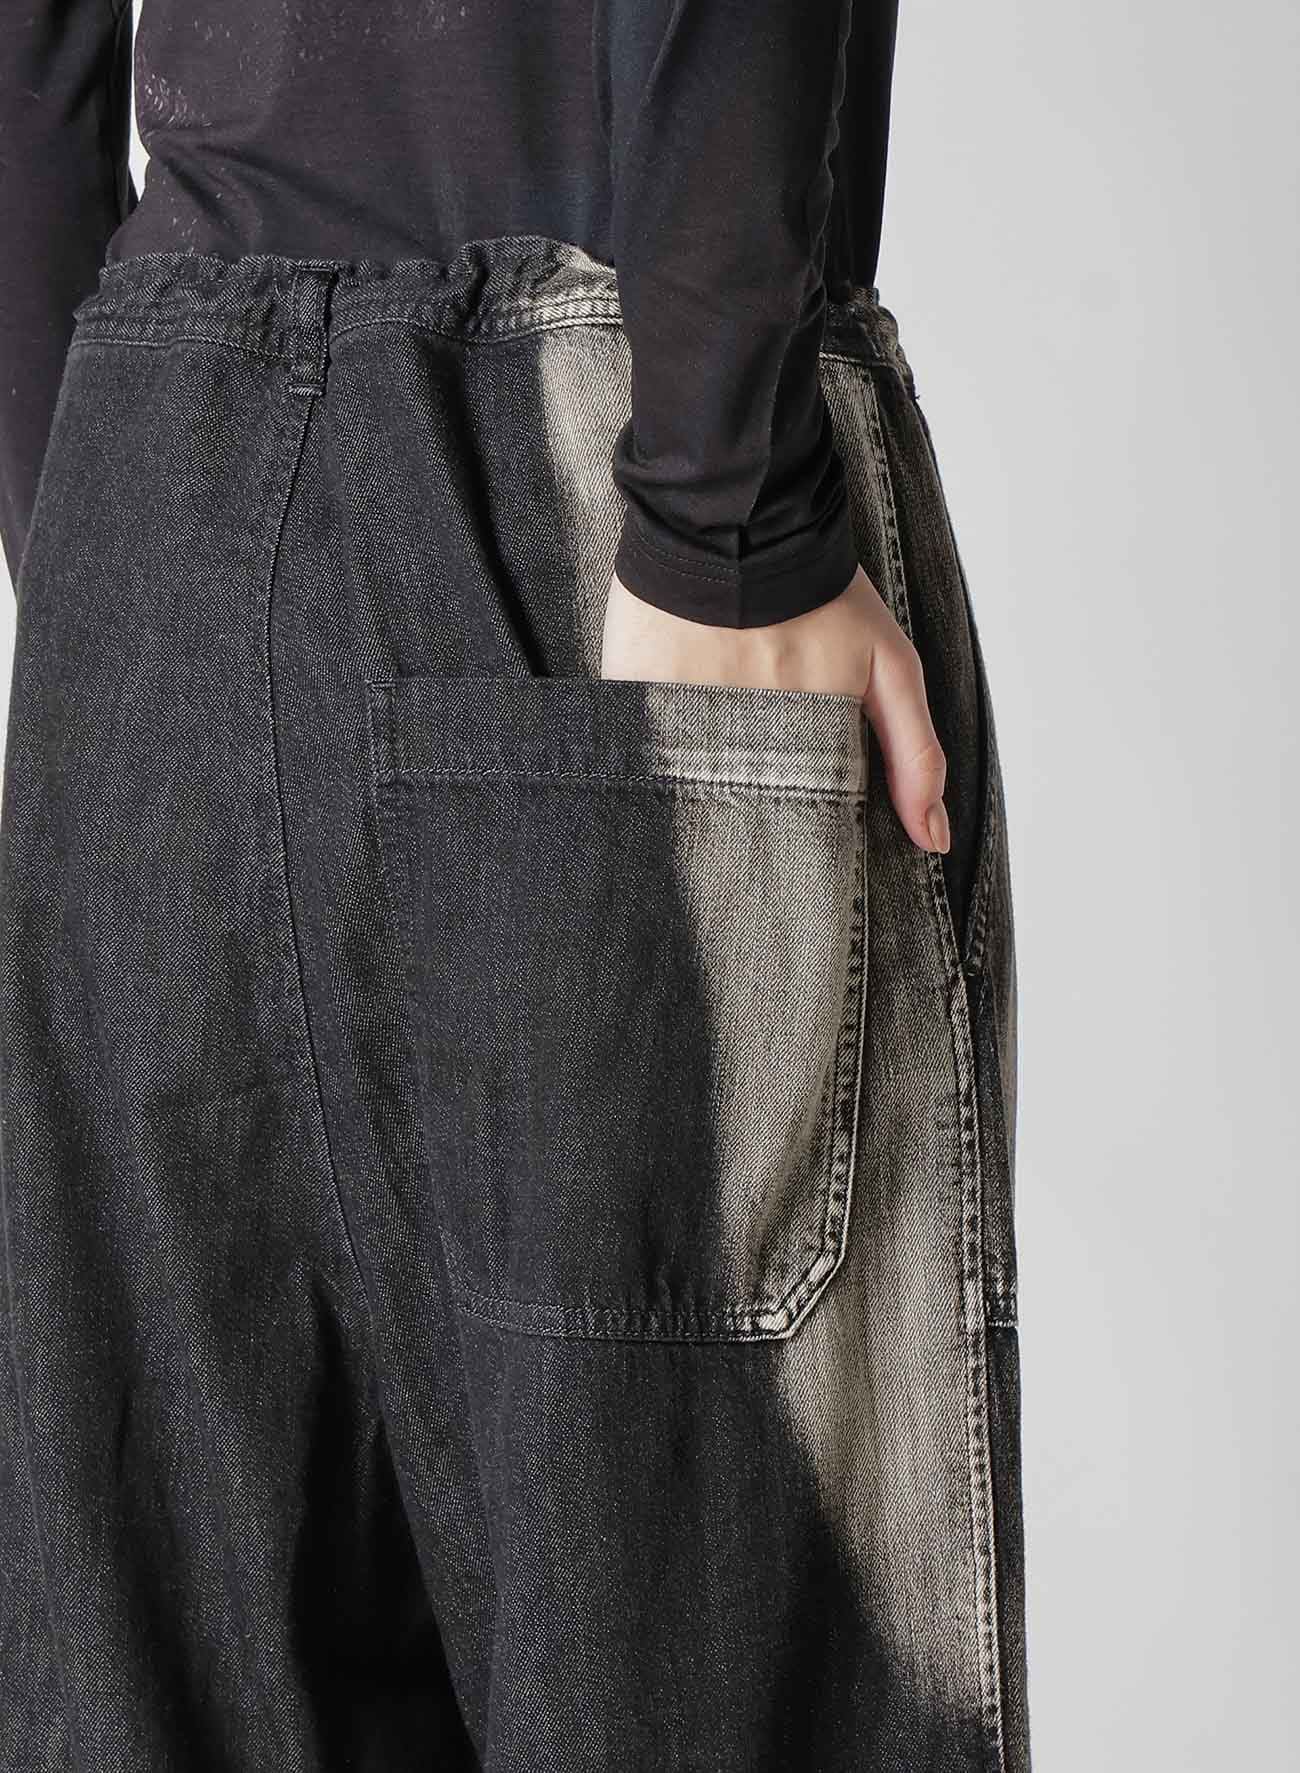 【8/2 12:00(JST) Release】C/ SPOTTED DENIM LONG STRAIGHT PANTS